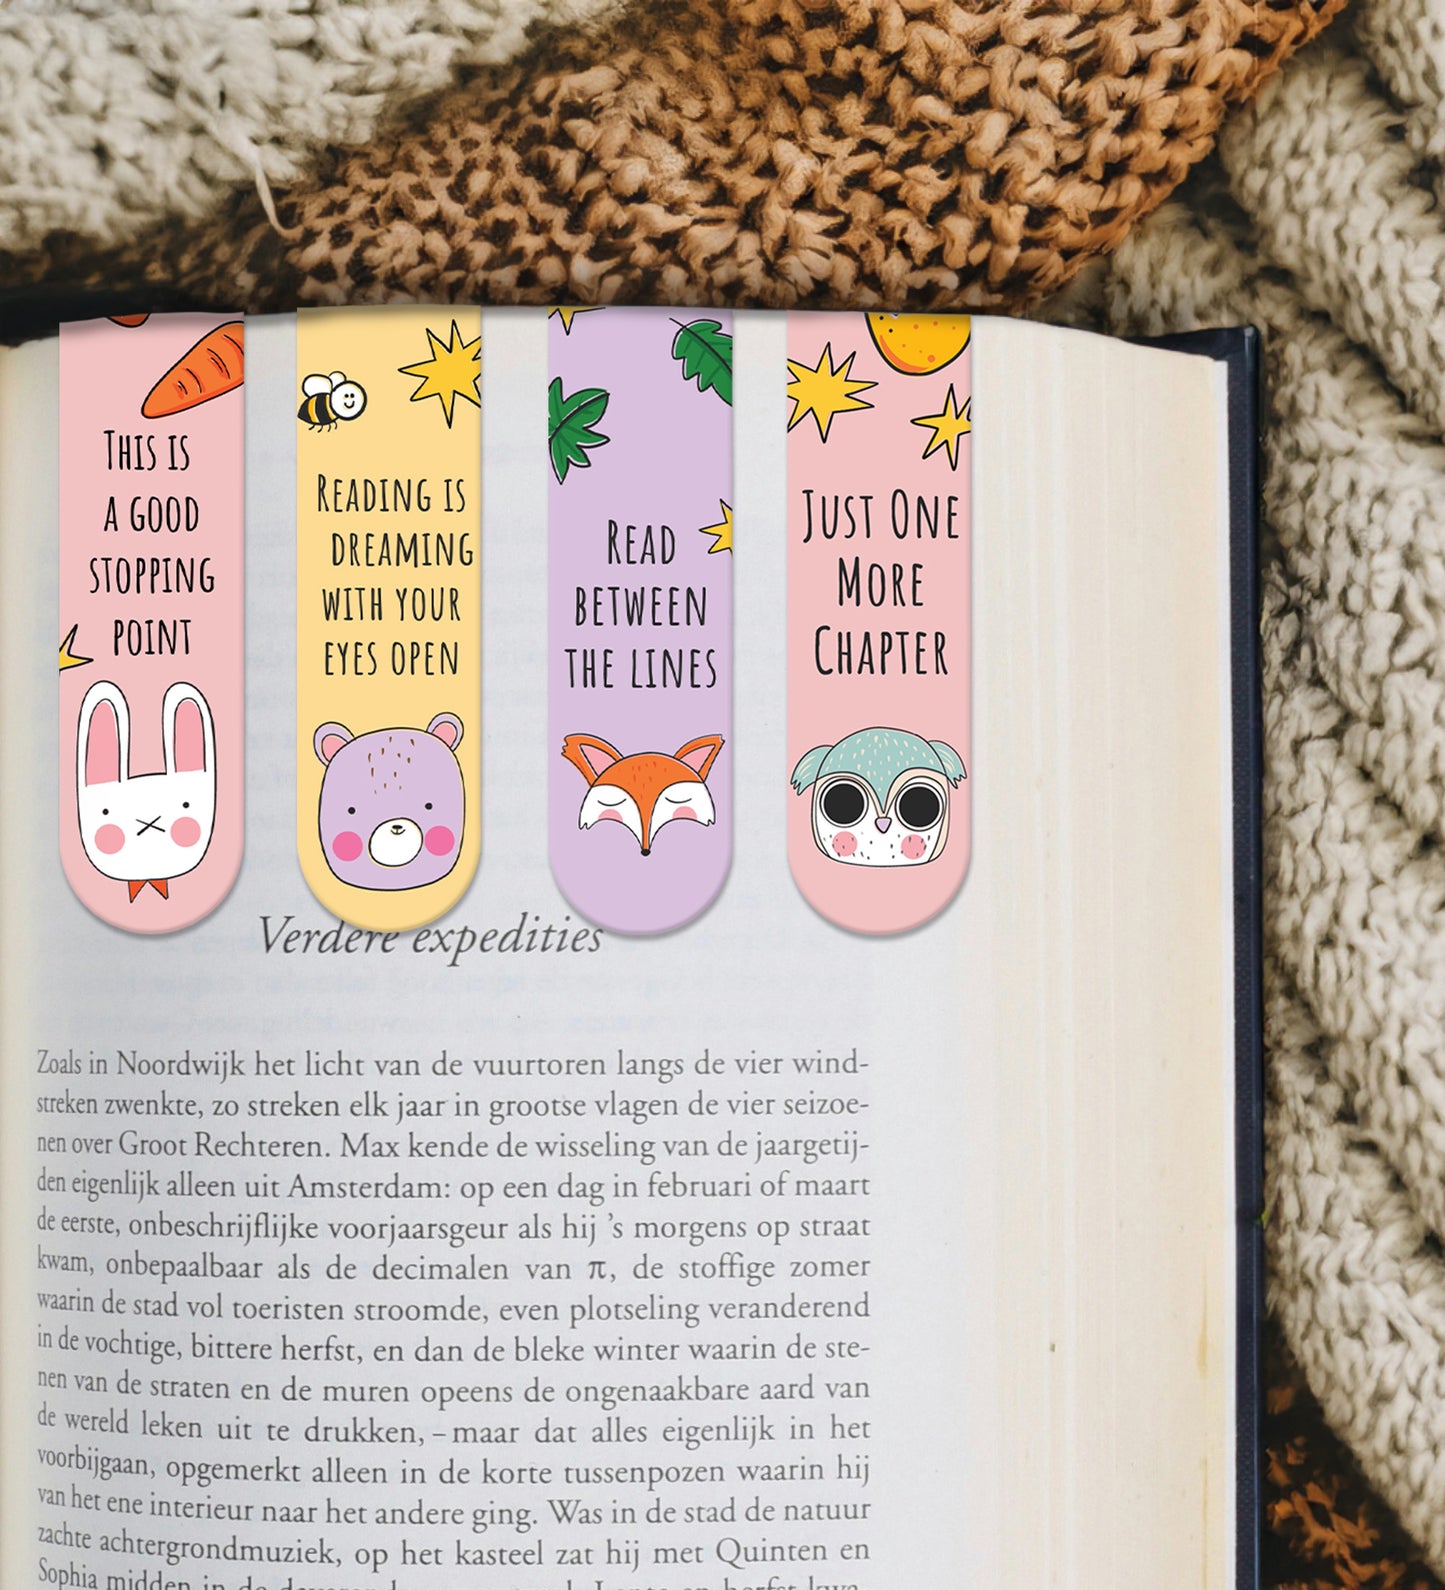 Magnetic Bookmark - Set Of 4 - Cute Text